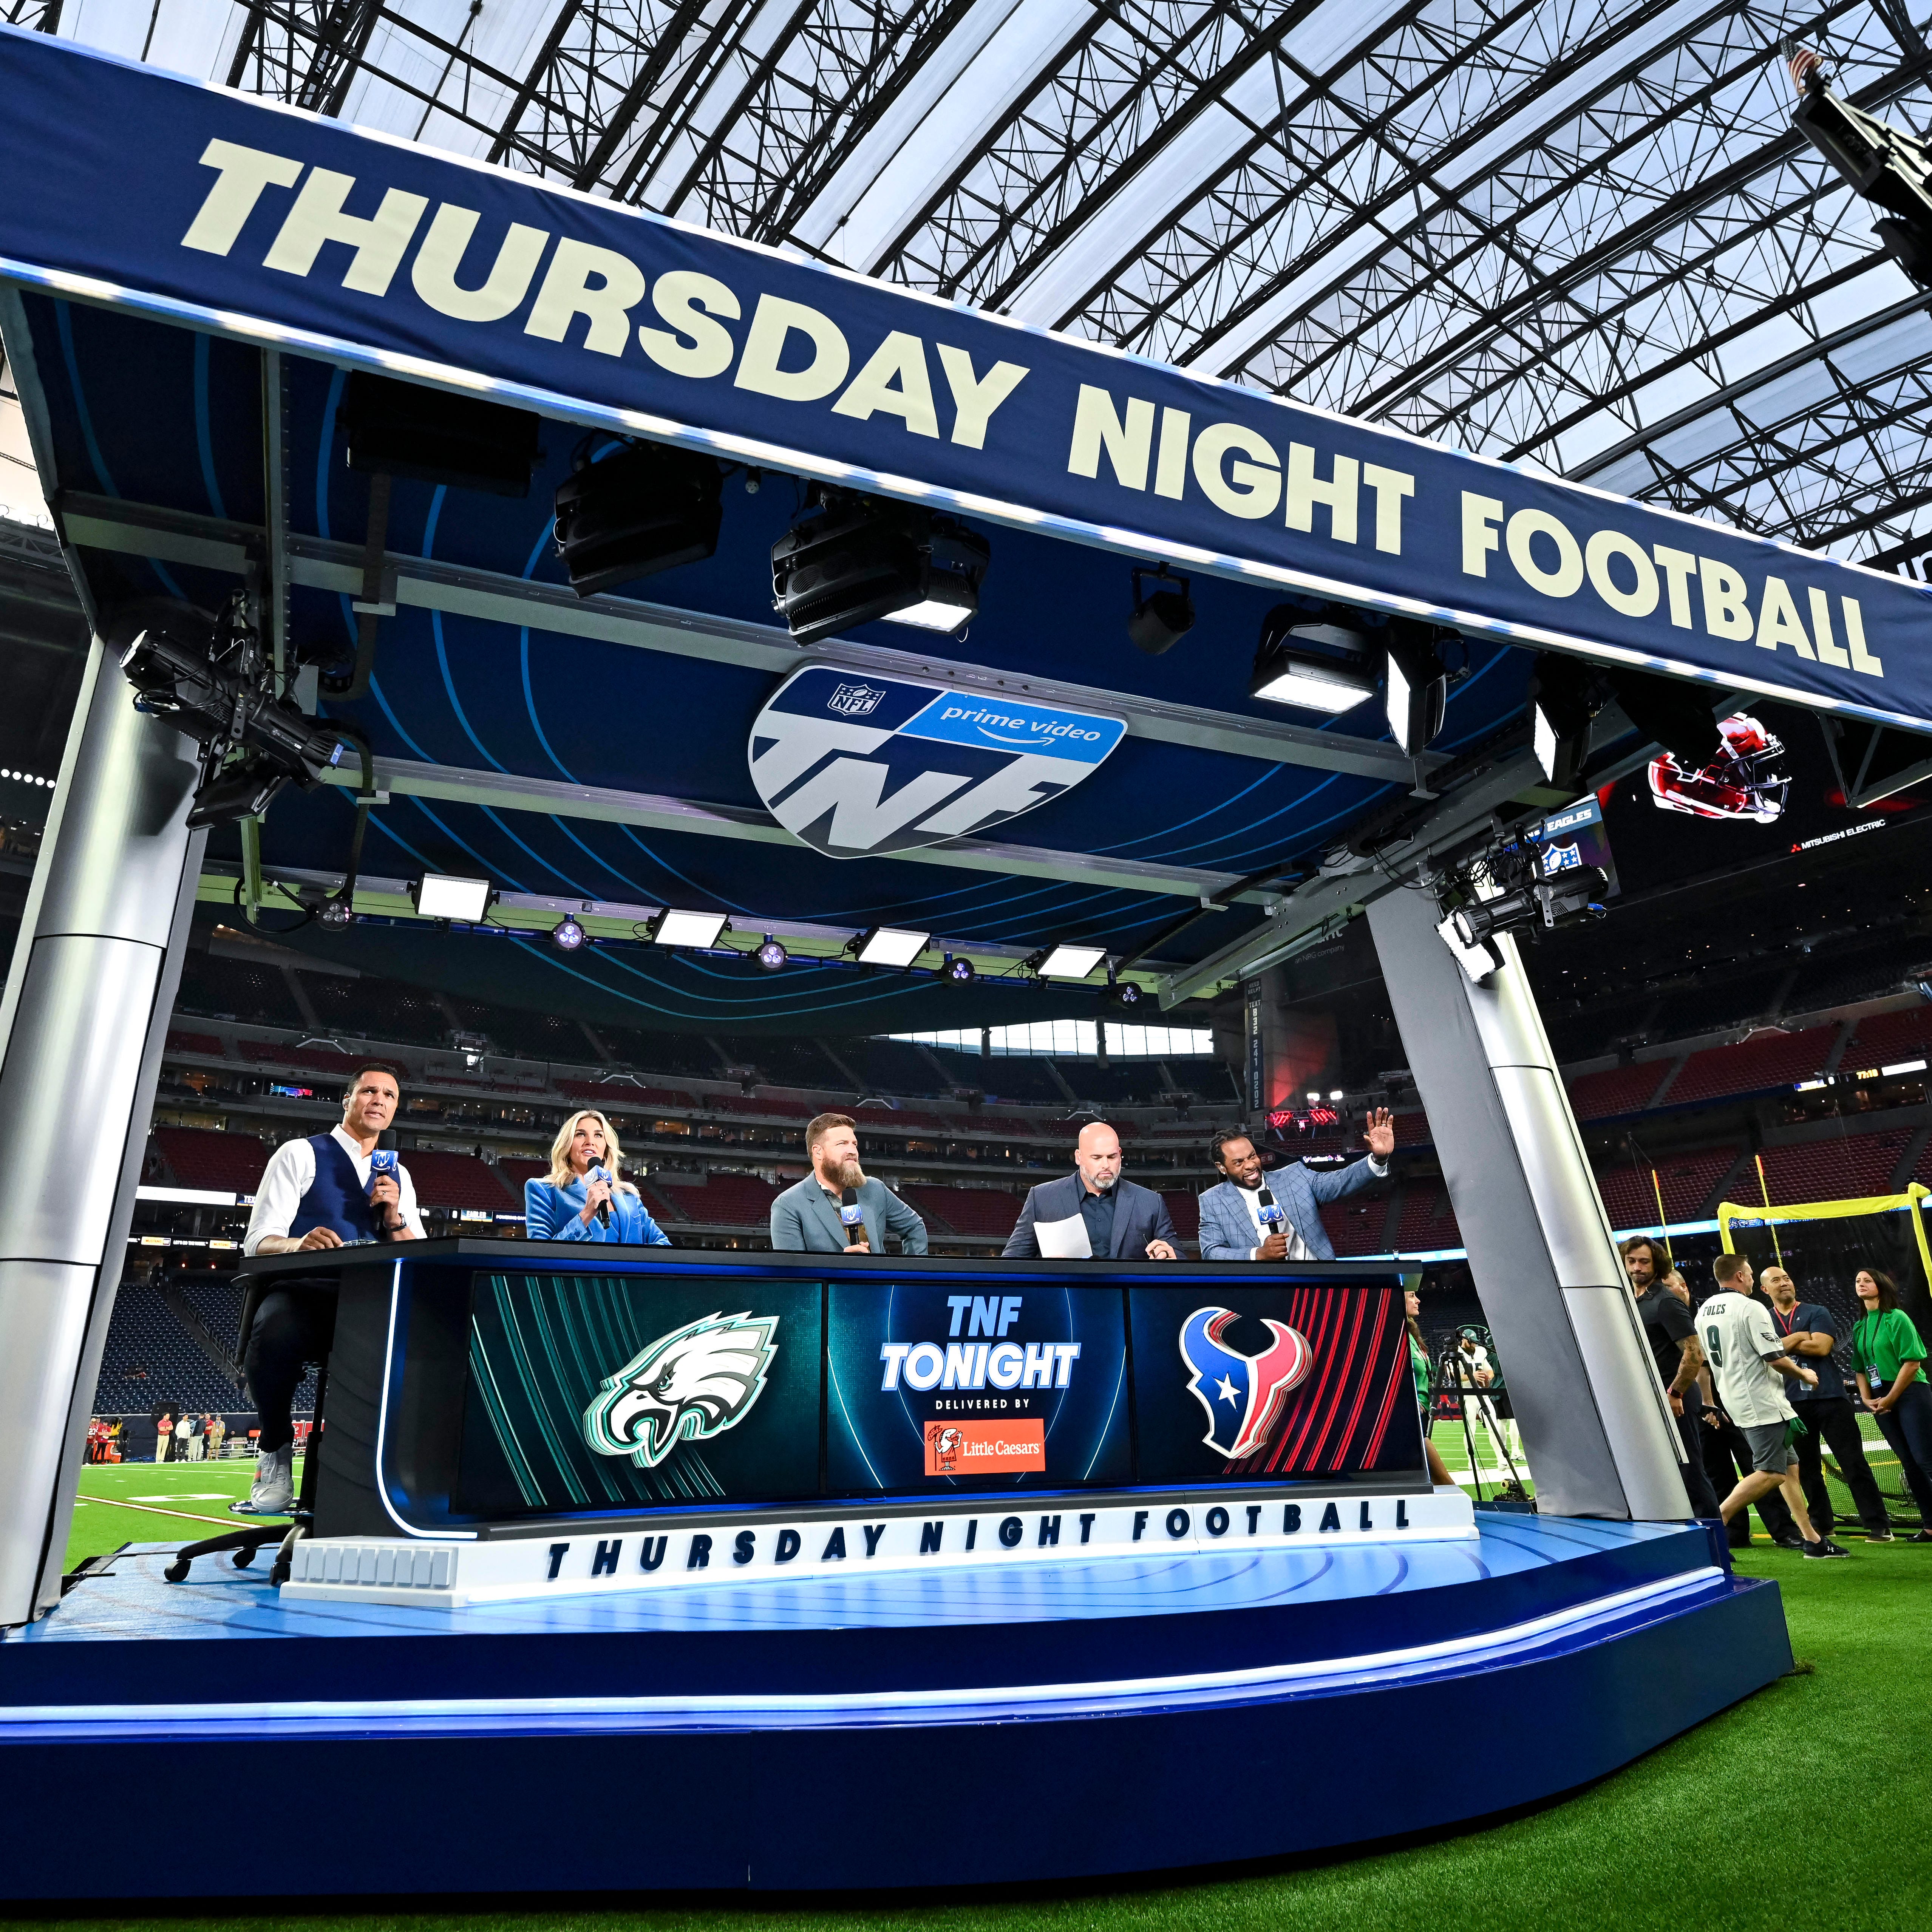 The Thursday Night Football pre-game stage before a game between the Houston Texans and the Philadelphia Eagles.